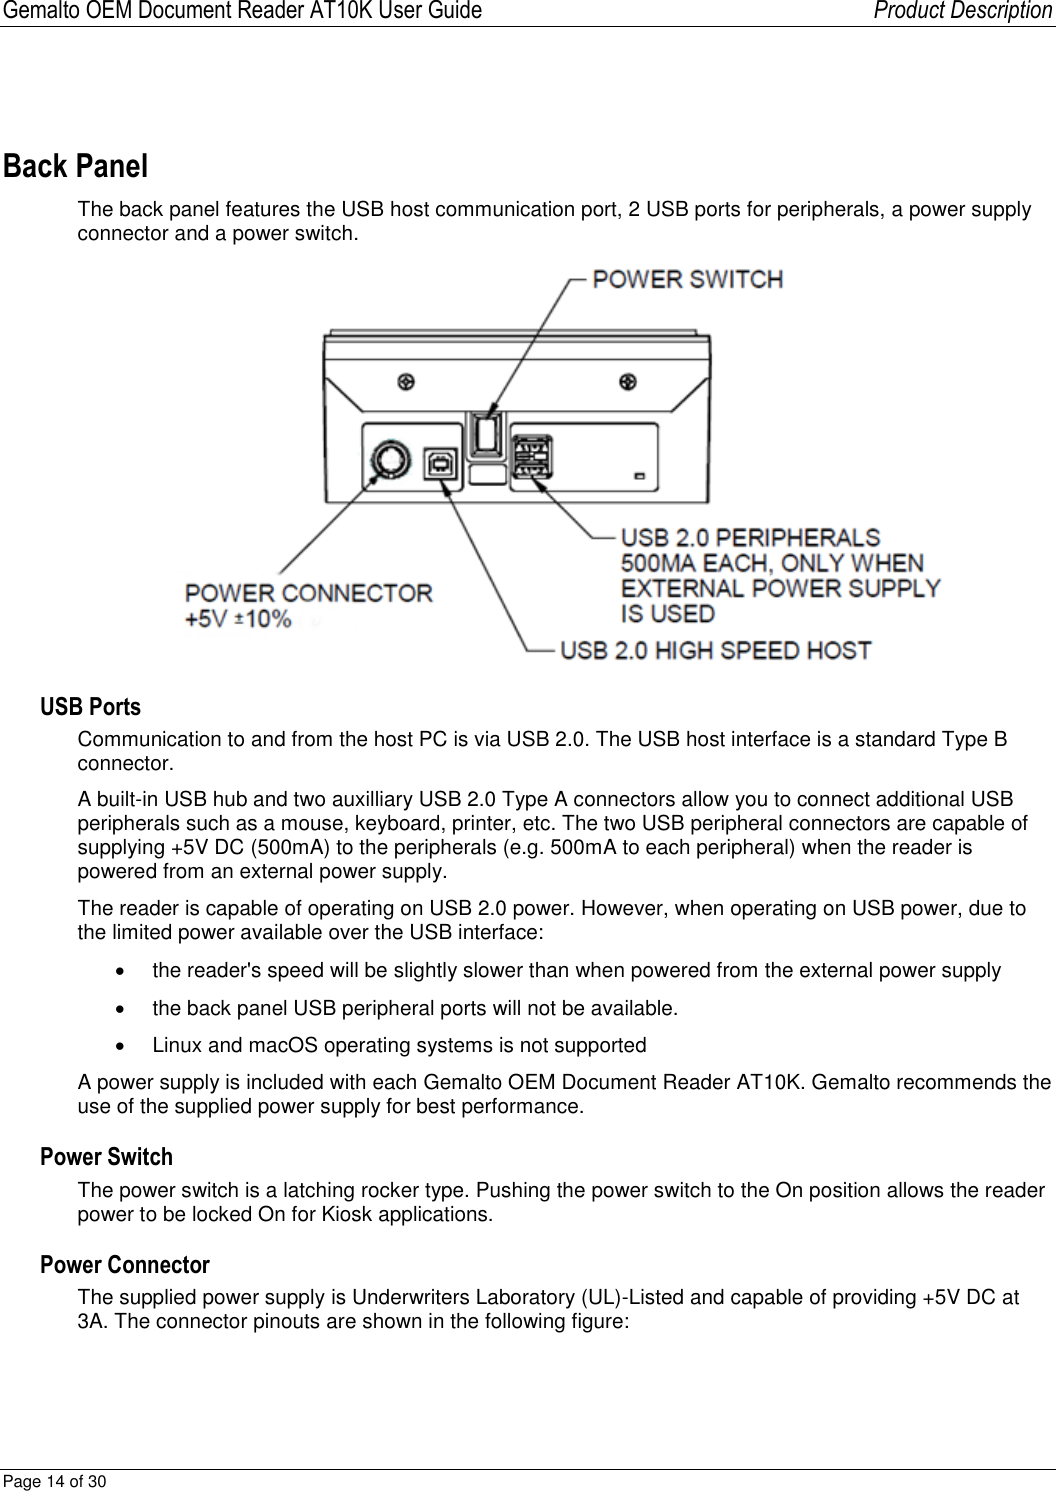 Gemalto OEM Document Reader AT10K User Guide   Product Description Page 14 of 30   Back Panel The back panel features the USB host communication port, 2 USB ports for peripherals, a power supply connector and a power switch.  USB Ports Communication to and from the host PC is via USB 2.0. The USB host interface is a standard Type B connector.  A built-in USB hub and two auxilliary USB 2.0 Type A connectors allow you to connect additional USB peripherals such as a mouse, keyboard, printer, etc. The two USB peripheral connectors are capable of supplying +5V DC (500mA) to the peripherals (e.g. 500mA to each peripheral) when the reader is powered from an external power supply. The reader is capable of operating on USB 2.0 power. However, when operating on USB power, due to the limited power available over the USB interface:   the reader&apos;s speed will be slightly slower than when powered from the external power supply   the back panel USB peripheral ports will not be available.   Linux and macOS operating systems is not supported A power supply is included with each Gemalto OEM Document Reader AT10K. Gemalto recommends the use of the supplied power supply for best performance. Power Switch The power switch is a latching rocker type. Pushing the power switch to the On position allows the reader power to be locked On for Kiosk applications. Power Connector The supplied power supply is Underwriters Laboratory (UL)-Listed and capable of providing +5V DC at 3A. The connector pinouts are shown in the following figure:  